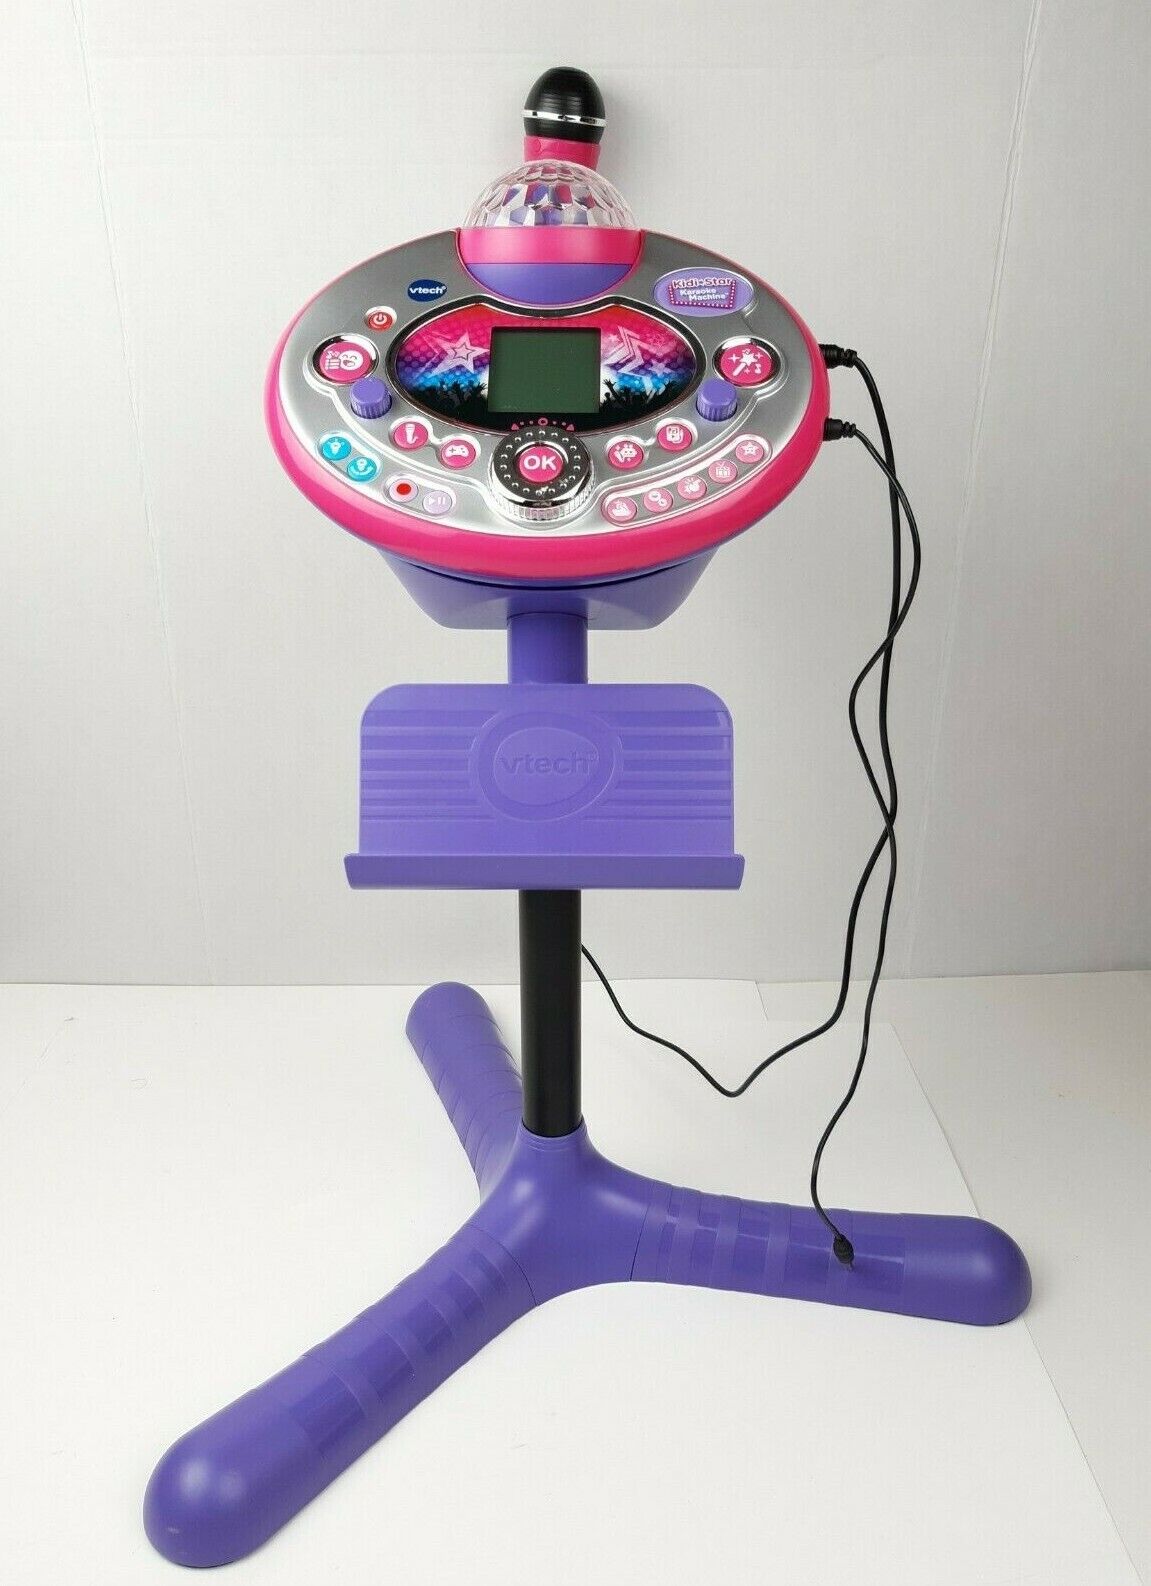 VTech Kidi Star Karaoke Machine Connects To MP3 Mobile Devices Pink Purple